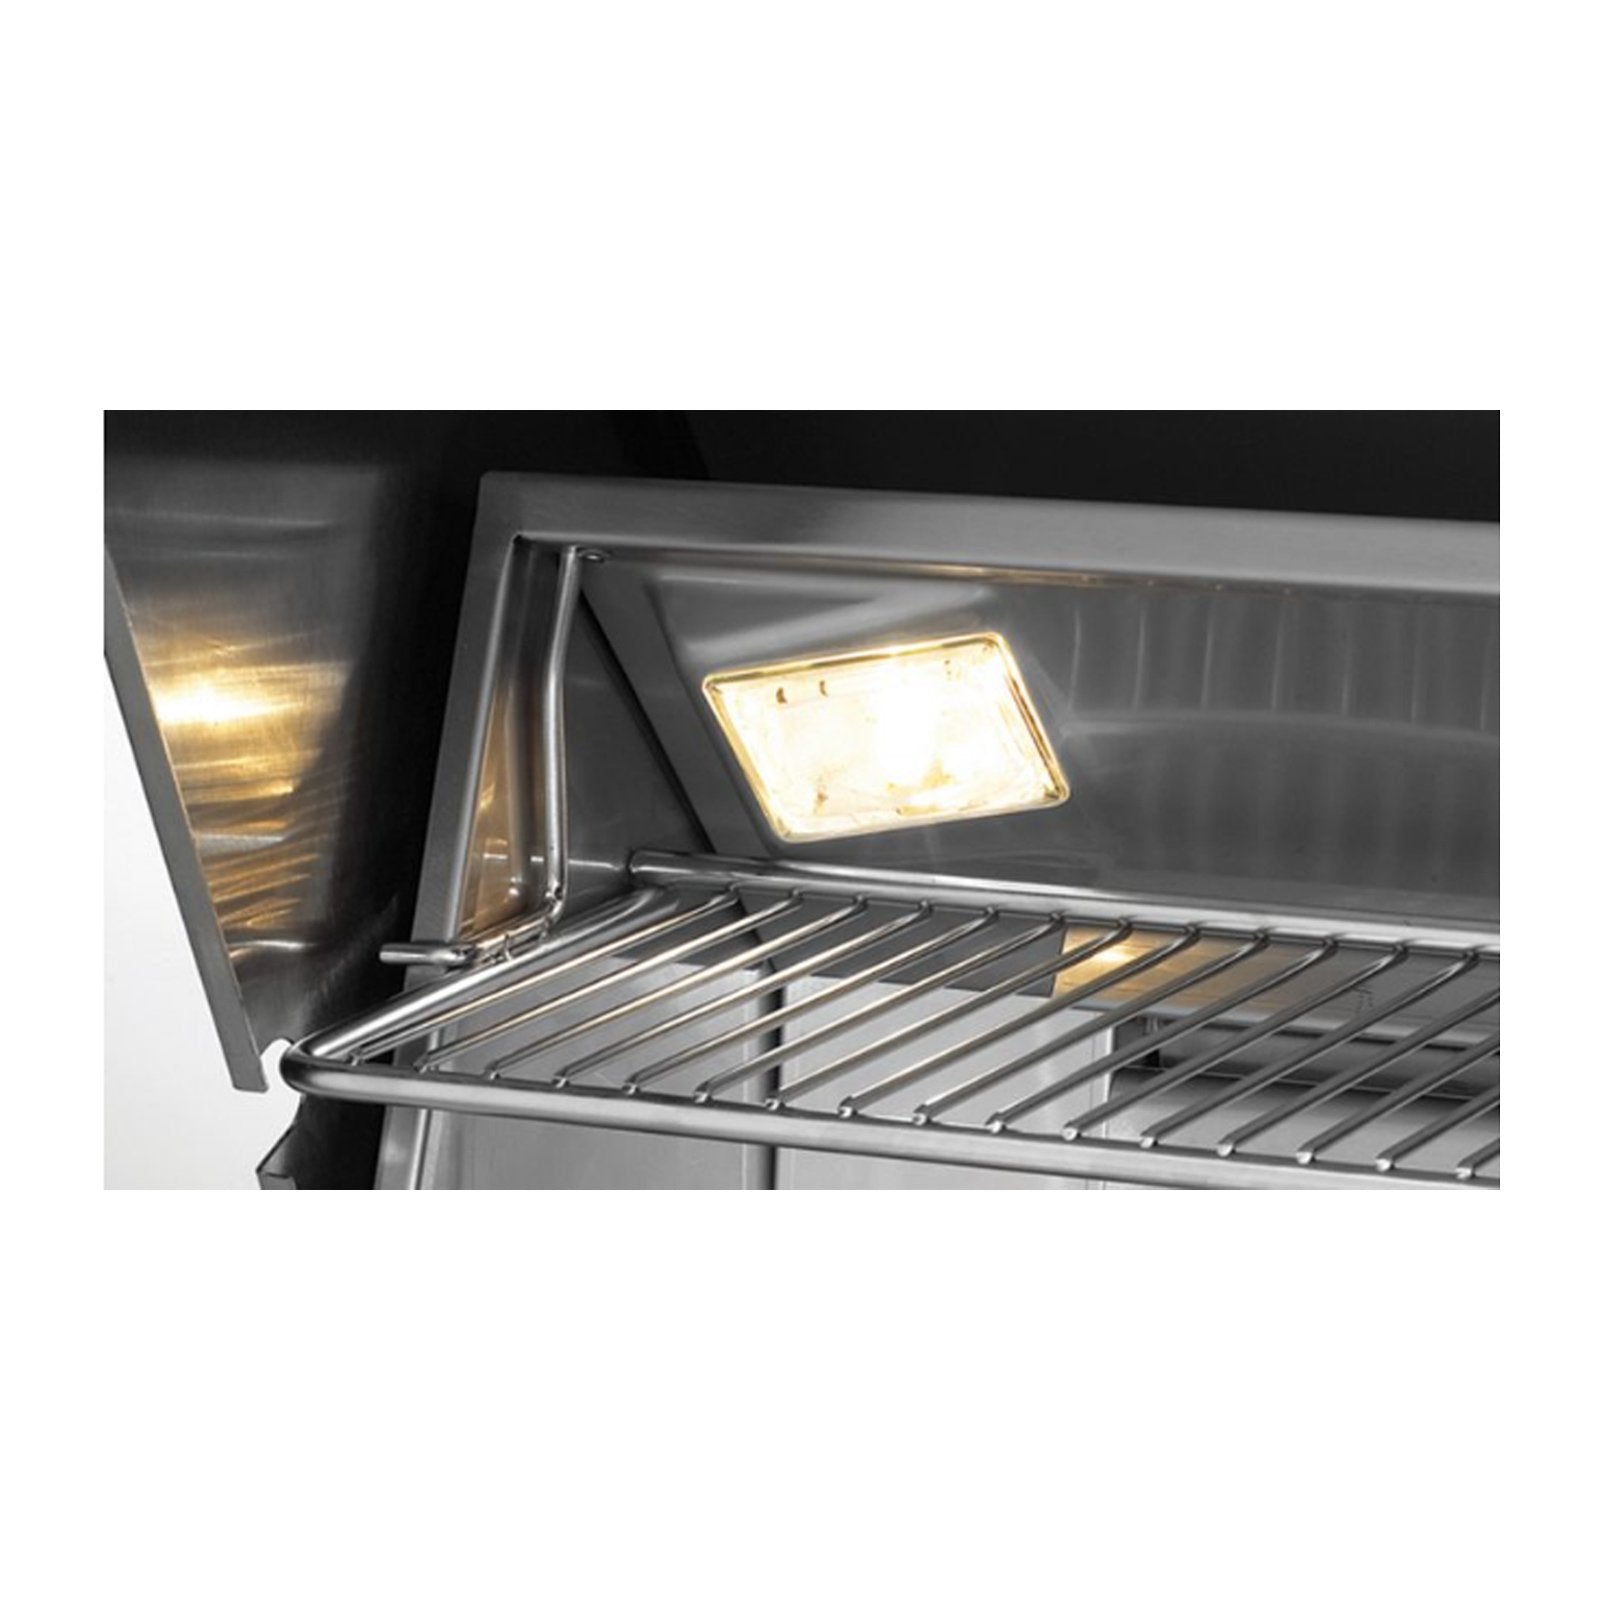 fire-magic-24-a430i-built-in-gas-grill-with-analog-thermometer 8